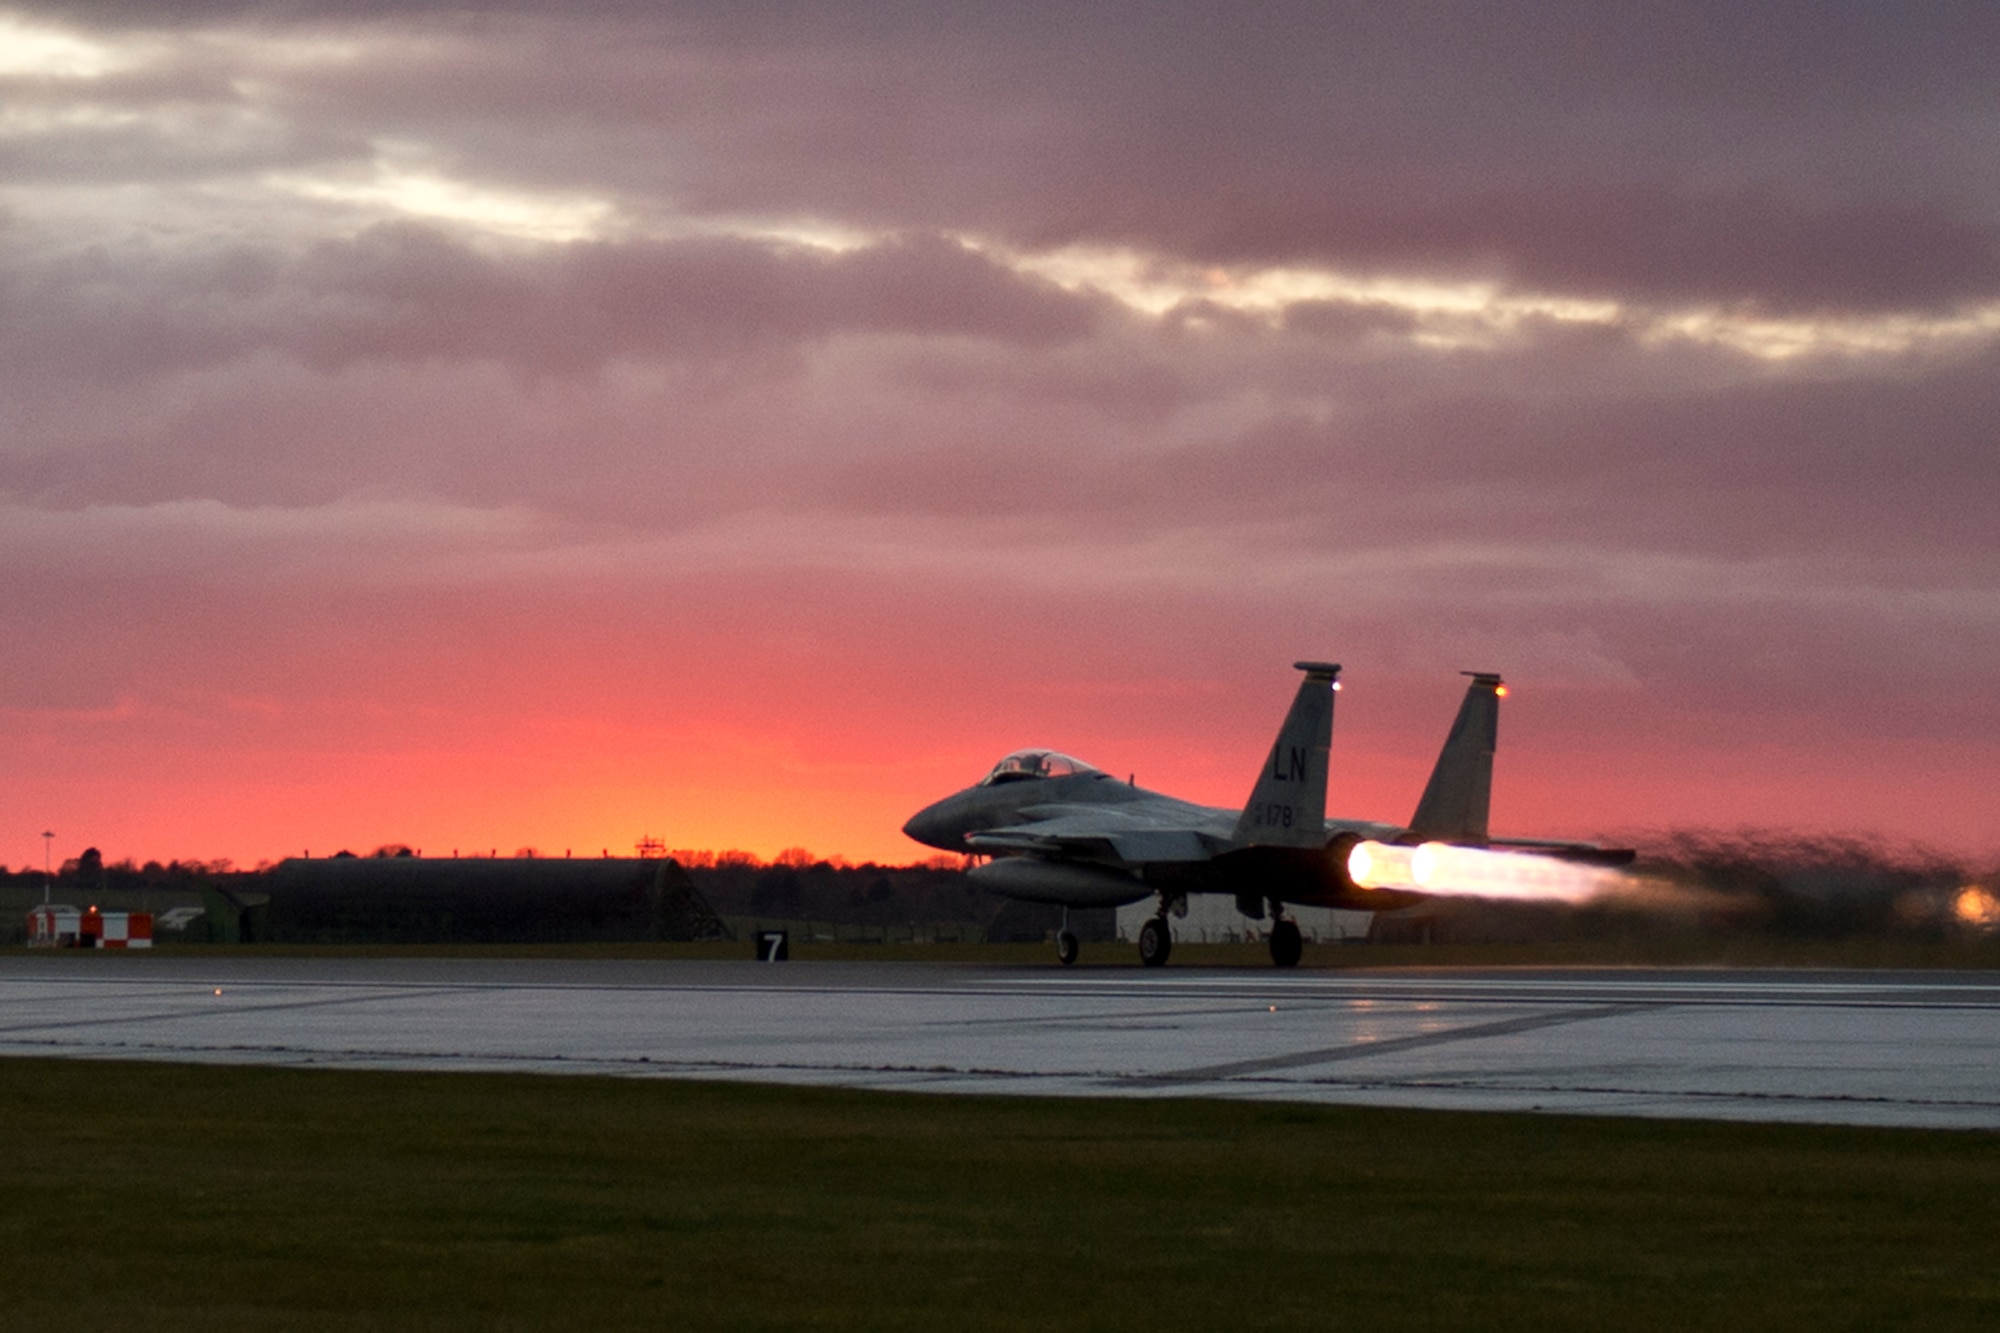 A 493rd Fighter Squadron pilot takes off in an F-15C Eagle at Royal Air Force Lakenheath, March 7, 2016. As an air-to-air fighter aircraft, the F-15C specializes in gaining and maintaining air superiority. (U.S. Air Force photo/Airman 1st Class Erin R. Babis)